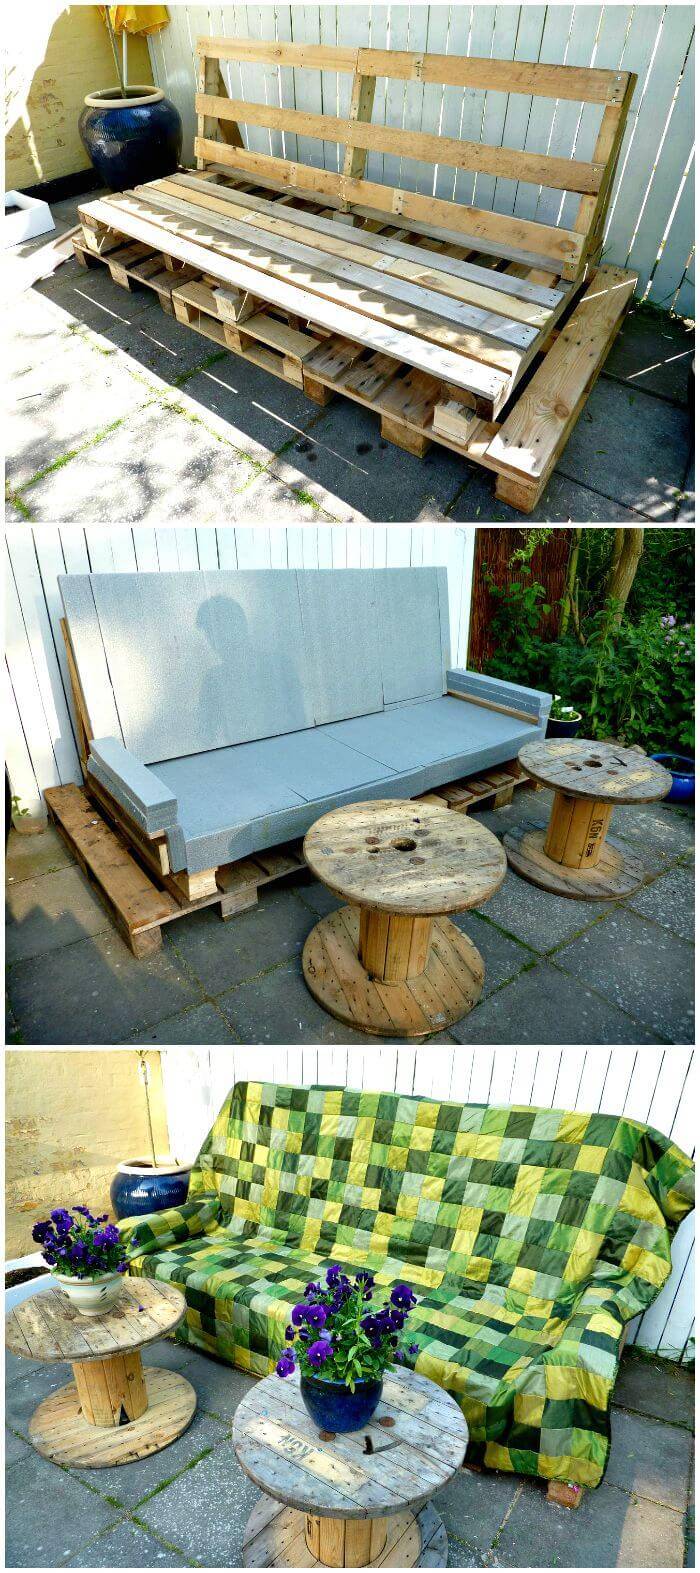 Low-Cost yet Sturdy Wooden Pallet sofa - DIY Pallet Sitting Furniture